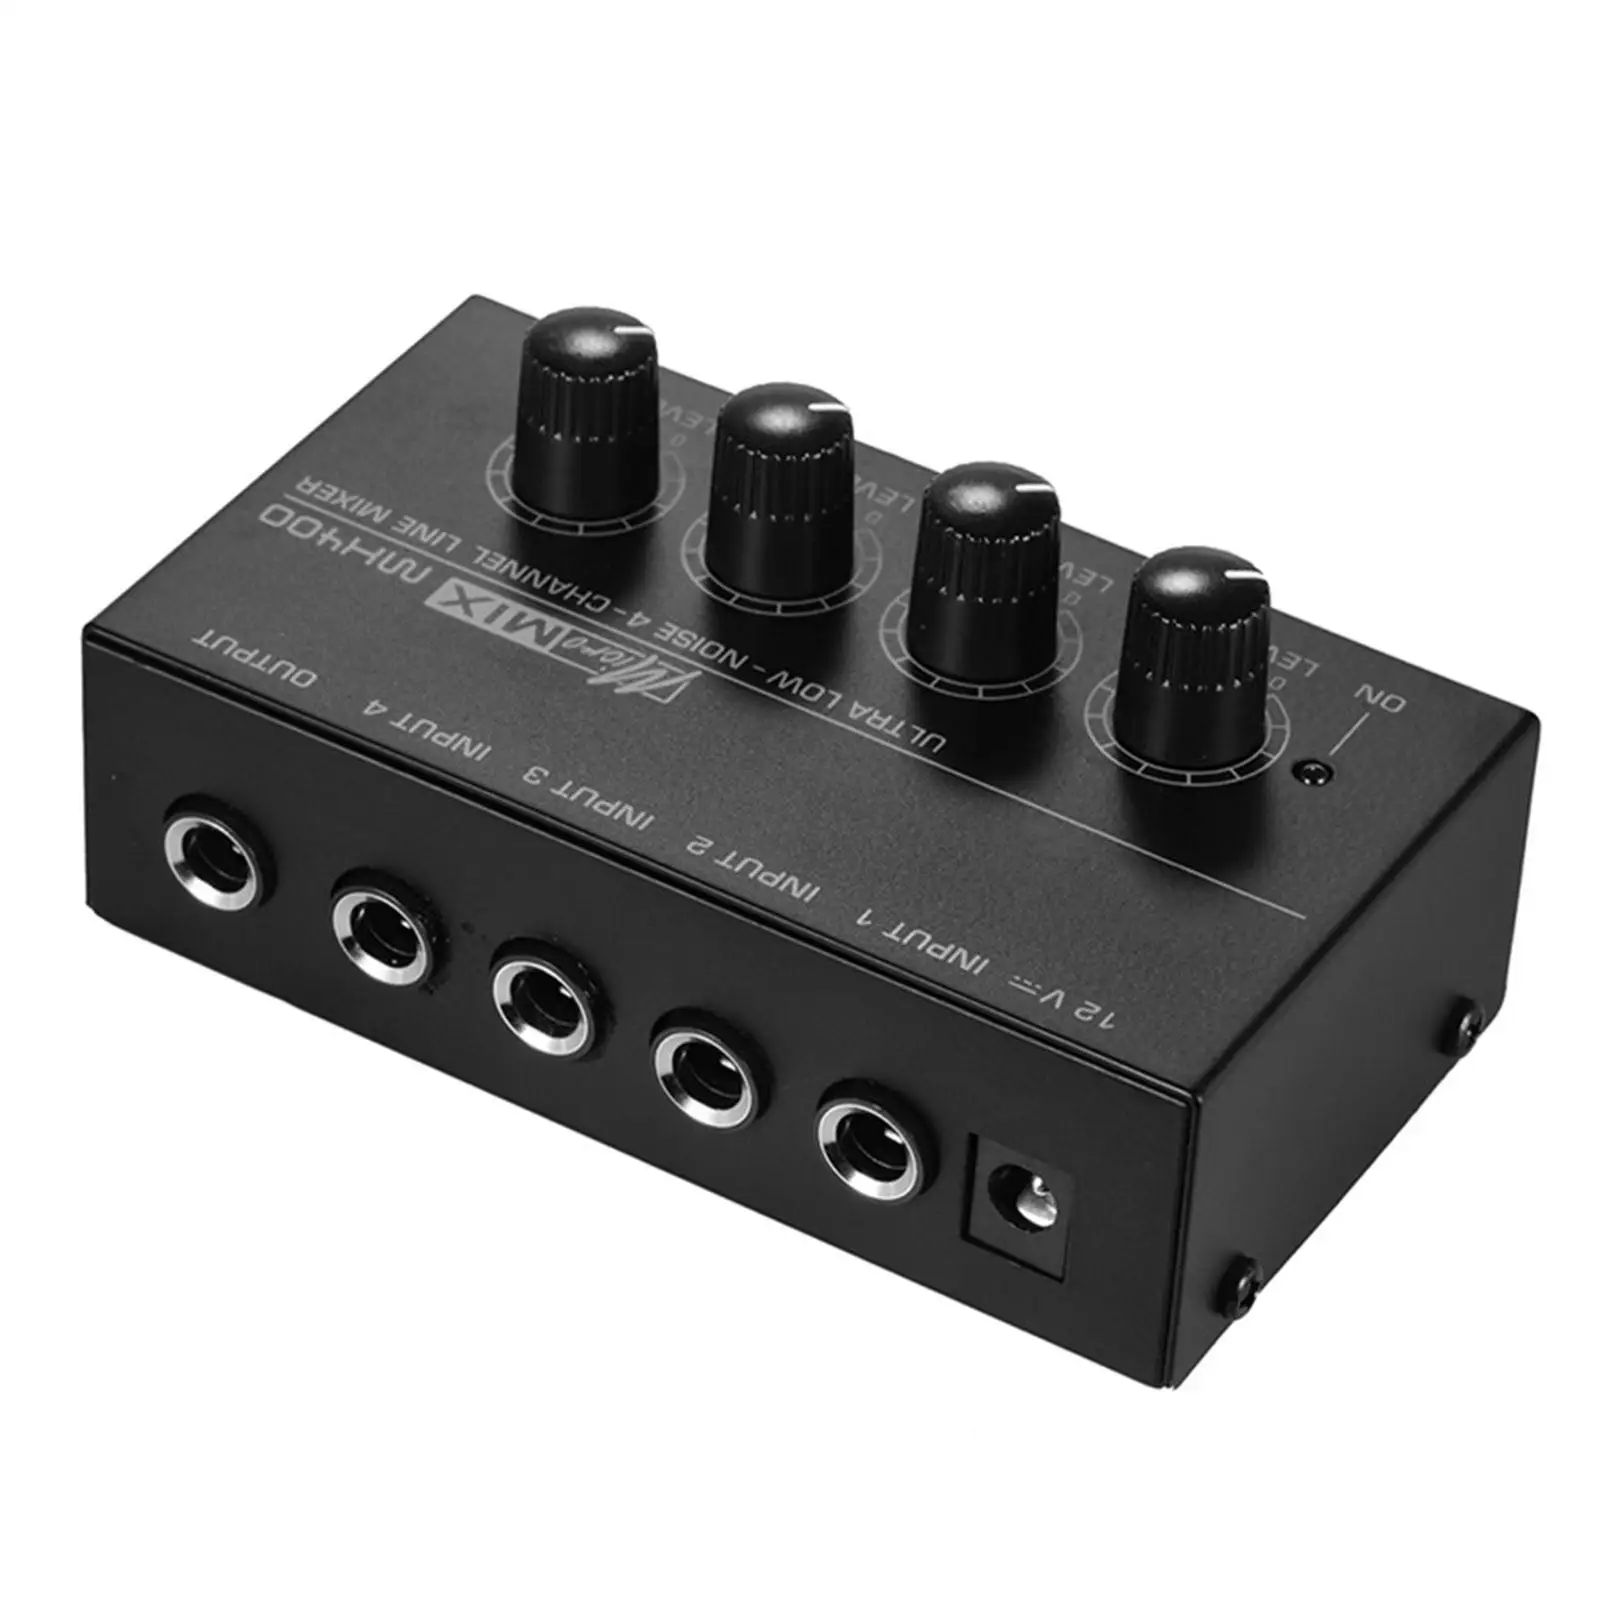 4 Channel Audio Mixer Mini Equalizer Music Recording Equipment Digital DJ Console for Small Clubs Outdoor Home Guitars Keyboards